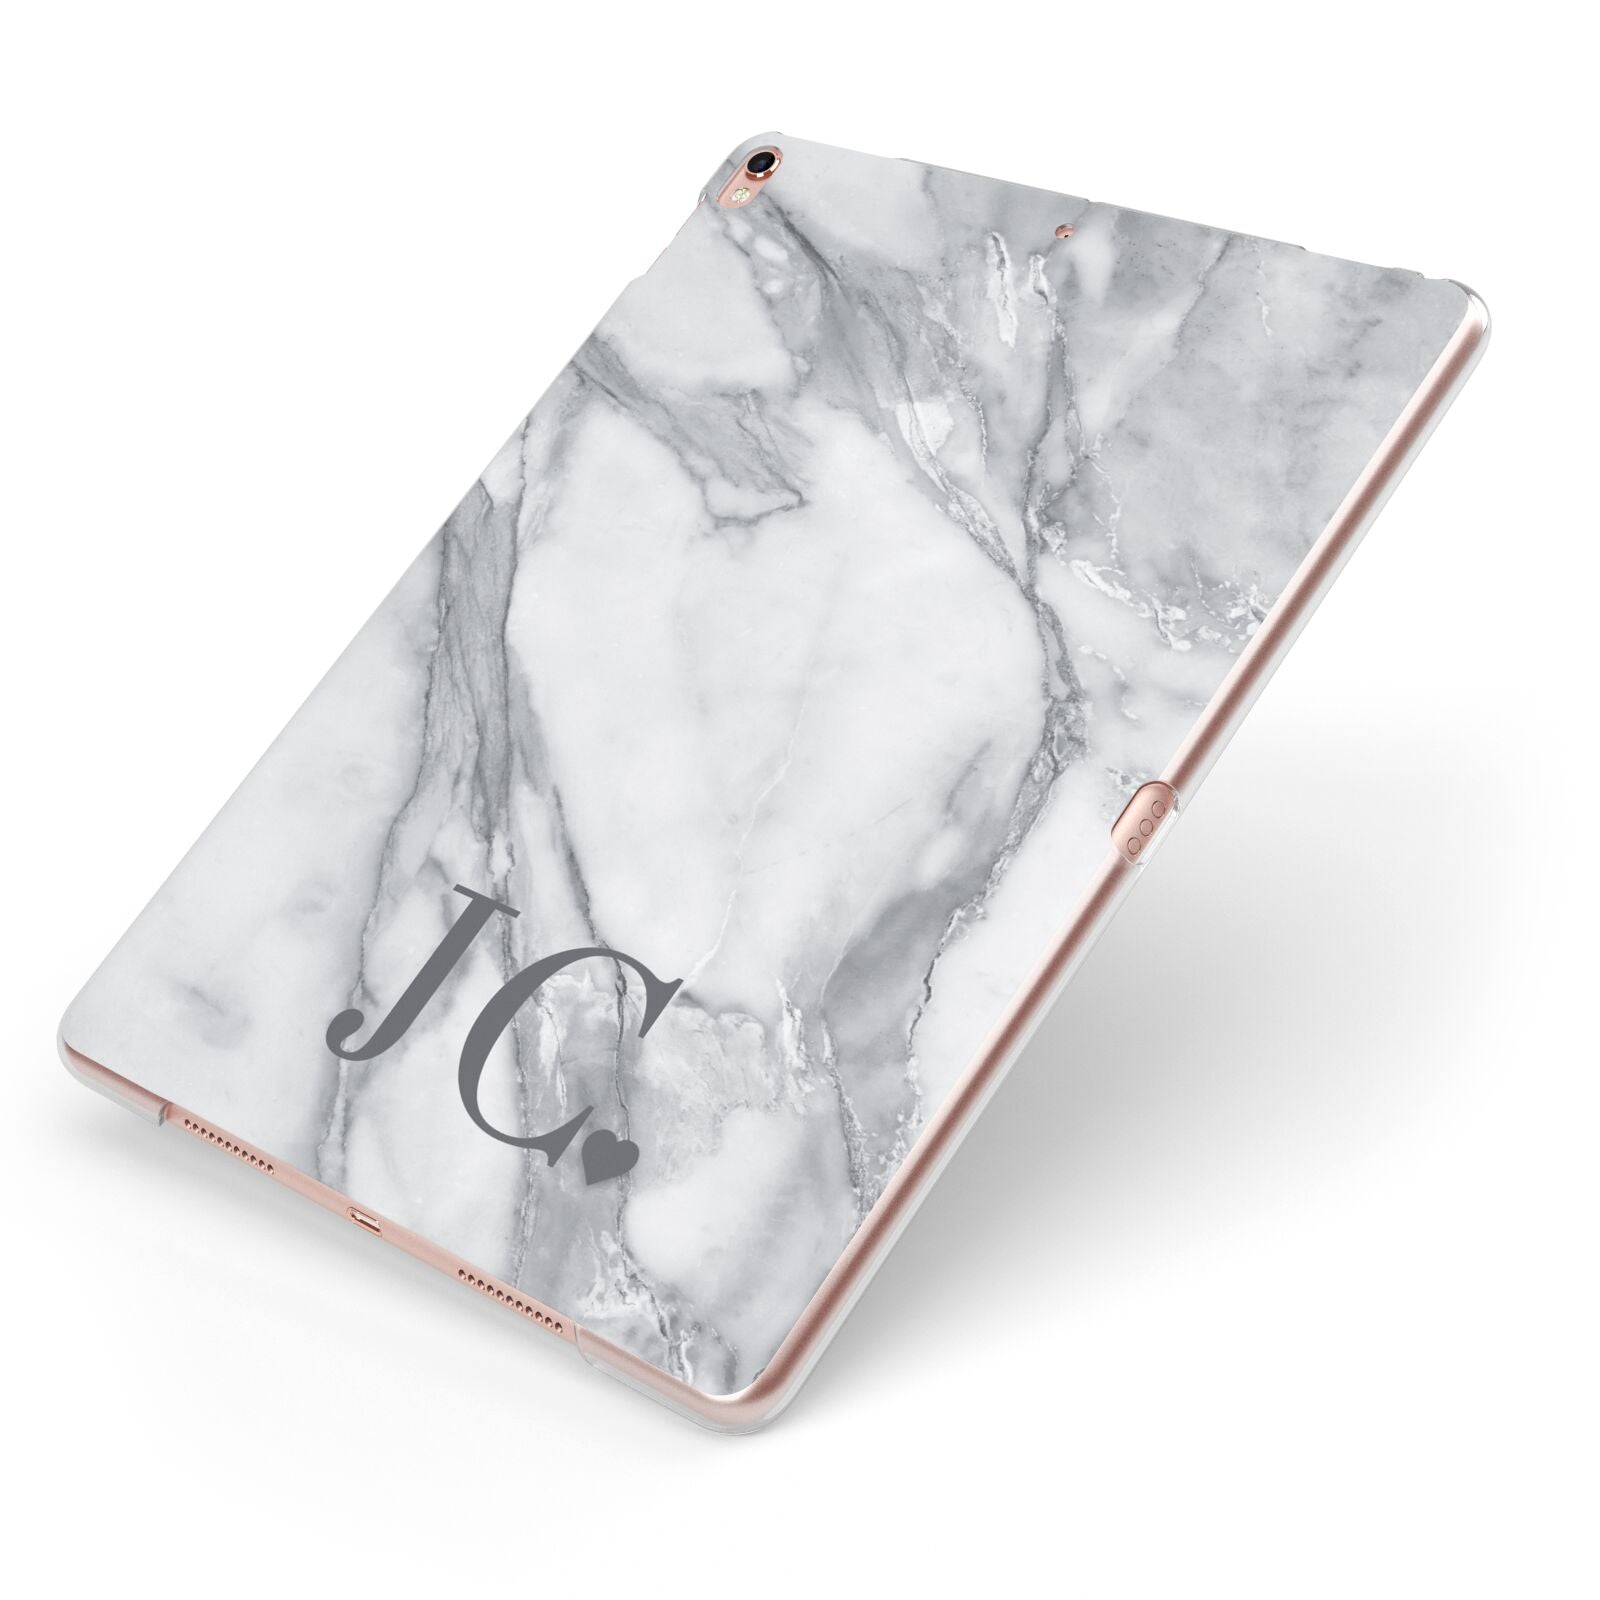 Initials Love Heart Apple iPad Case on Rose Gold iPad Side View